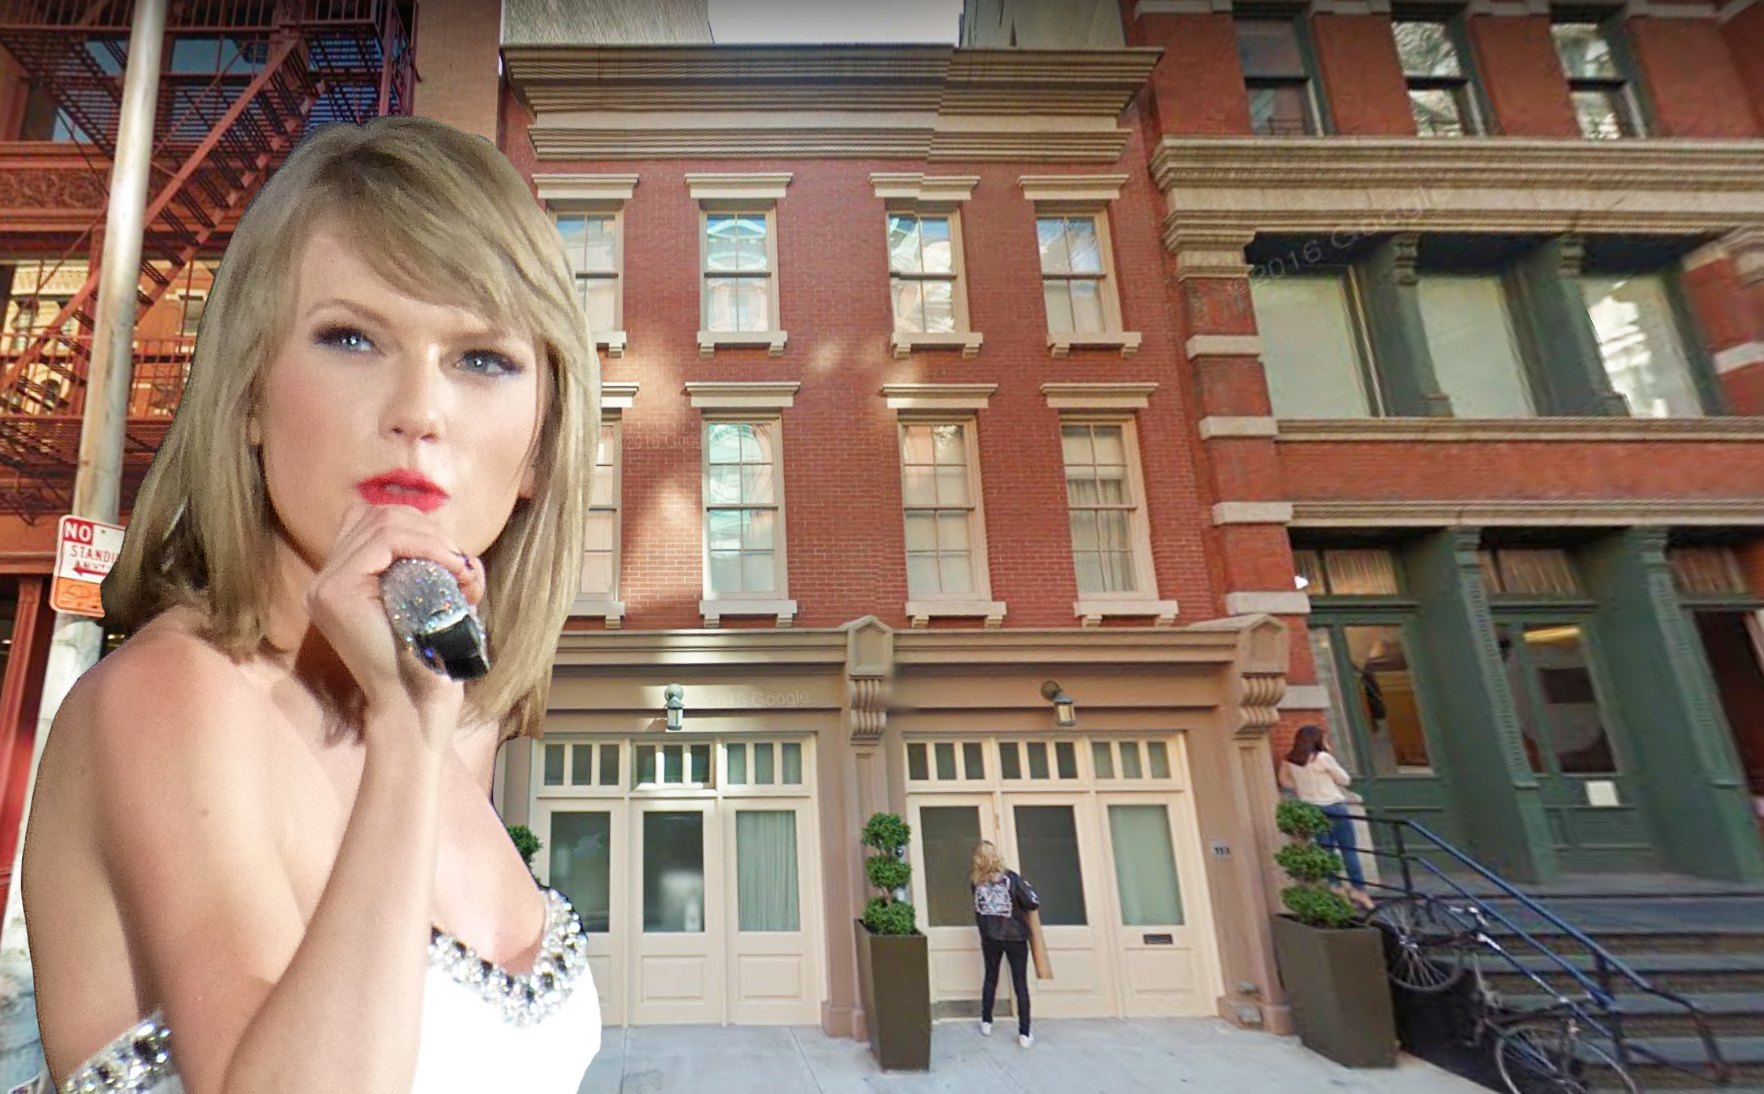 Taylor Swift says broker lawsuit in $18M townhouse buy is unfounded